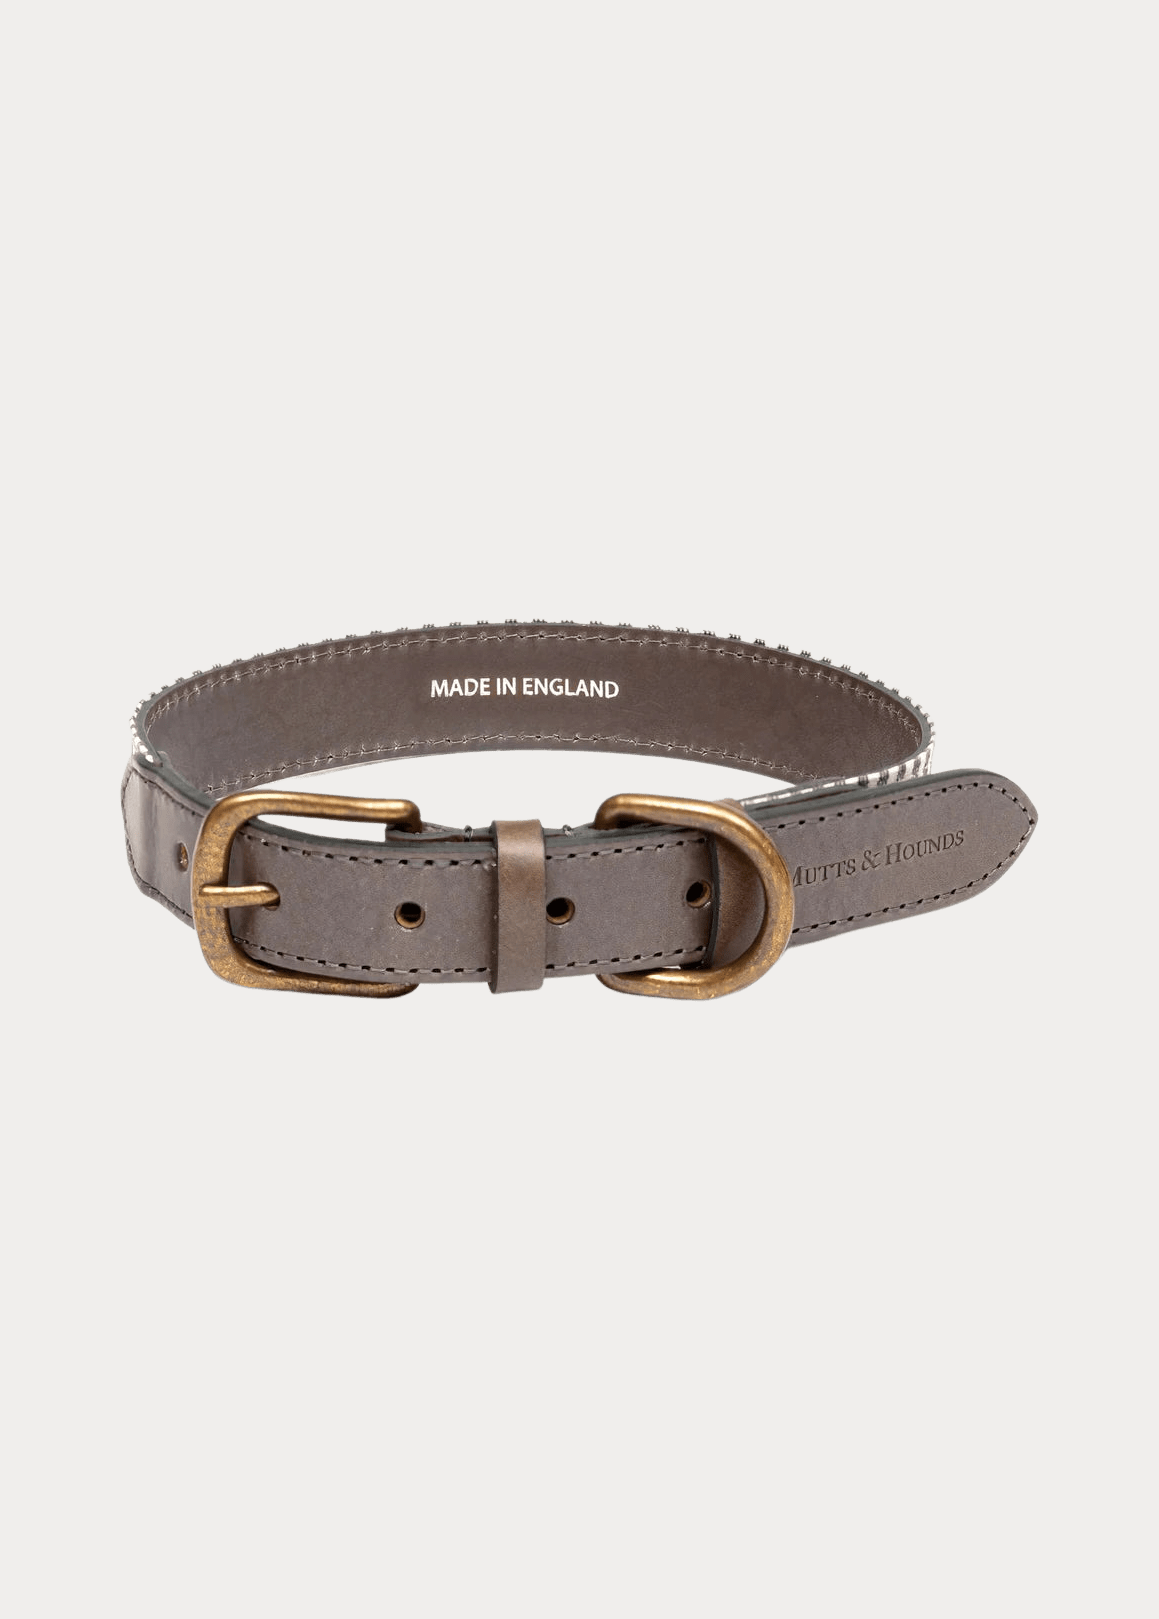 MUTTS & HOUNDS - CHARCOAL STRIPE & LEATHER DOG COLLAR